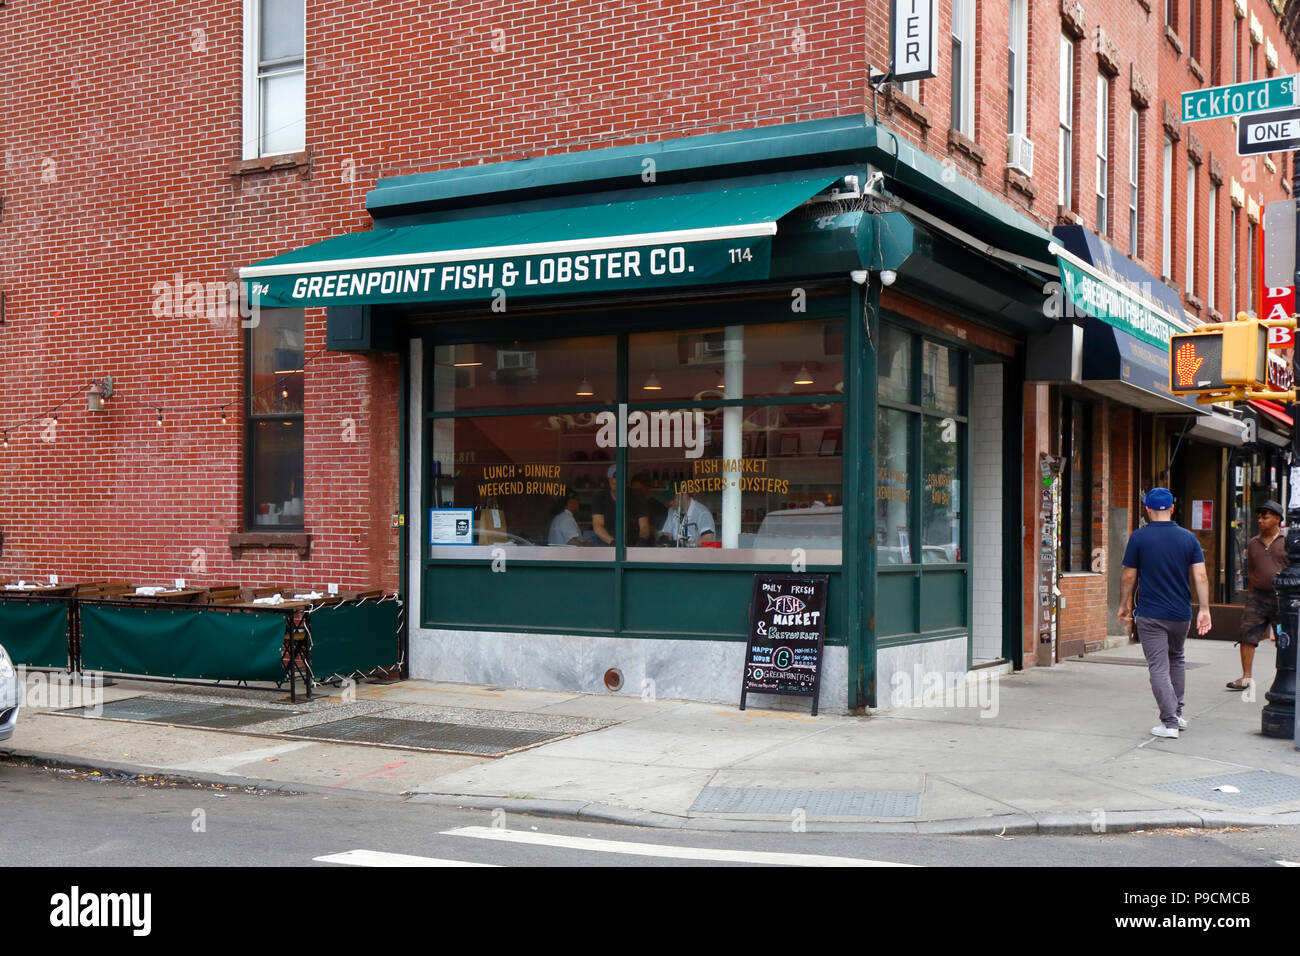 Greenpoint Fish and Lobster Co, 114 Nassau Ave, Brooklyn, NY. exterior storefront of a seafood shop and eatery in greenpoint Stock Photo